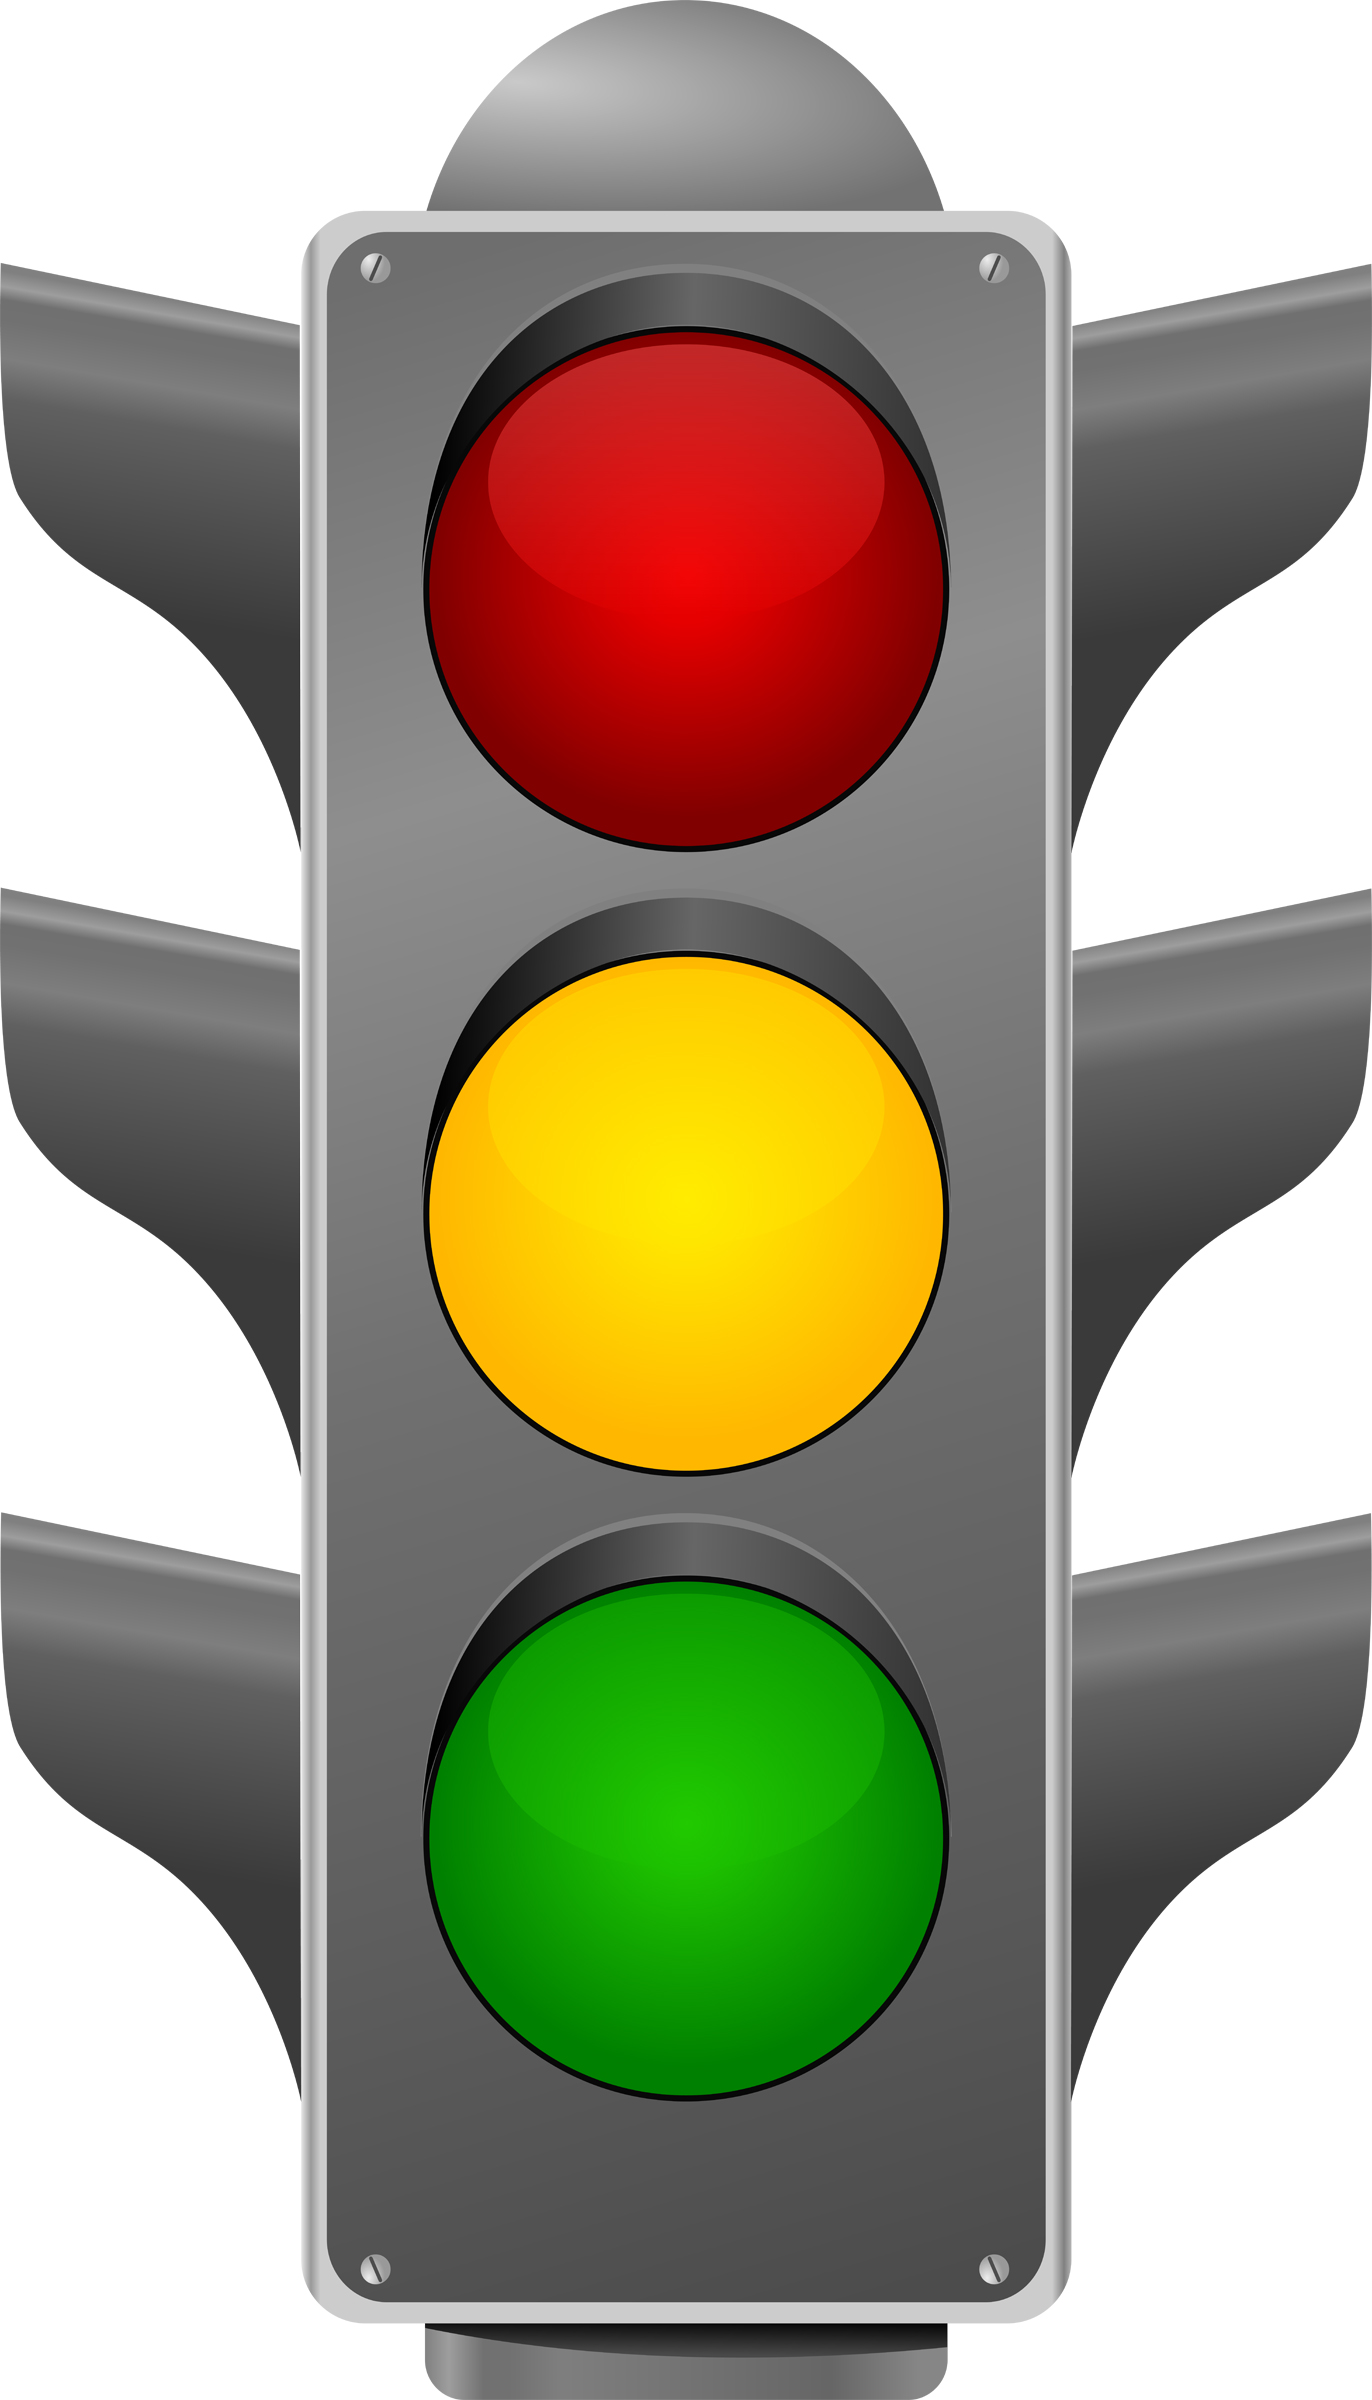 Stop Light Images & Pictures - Becuo